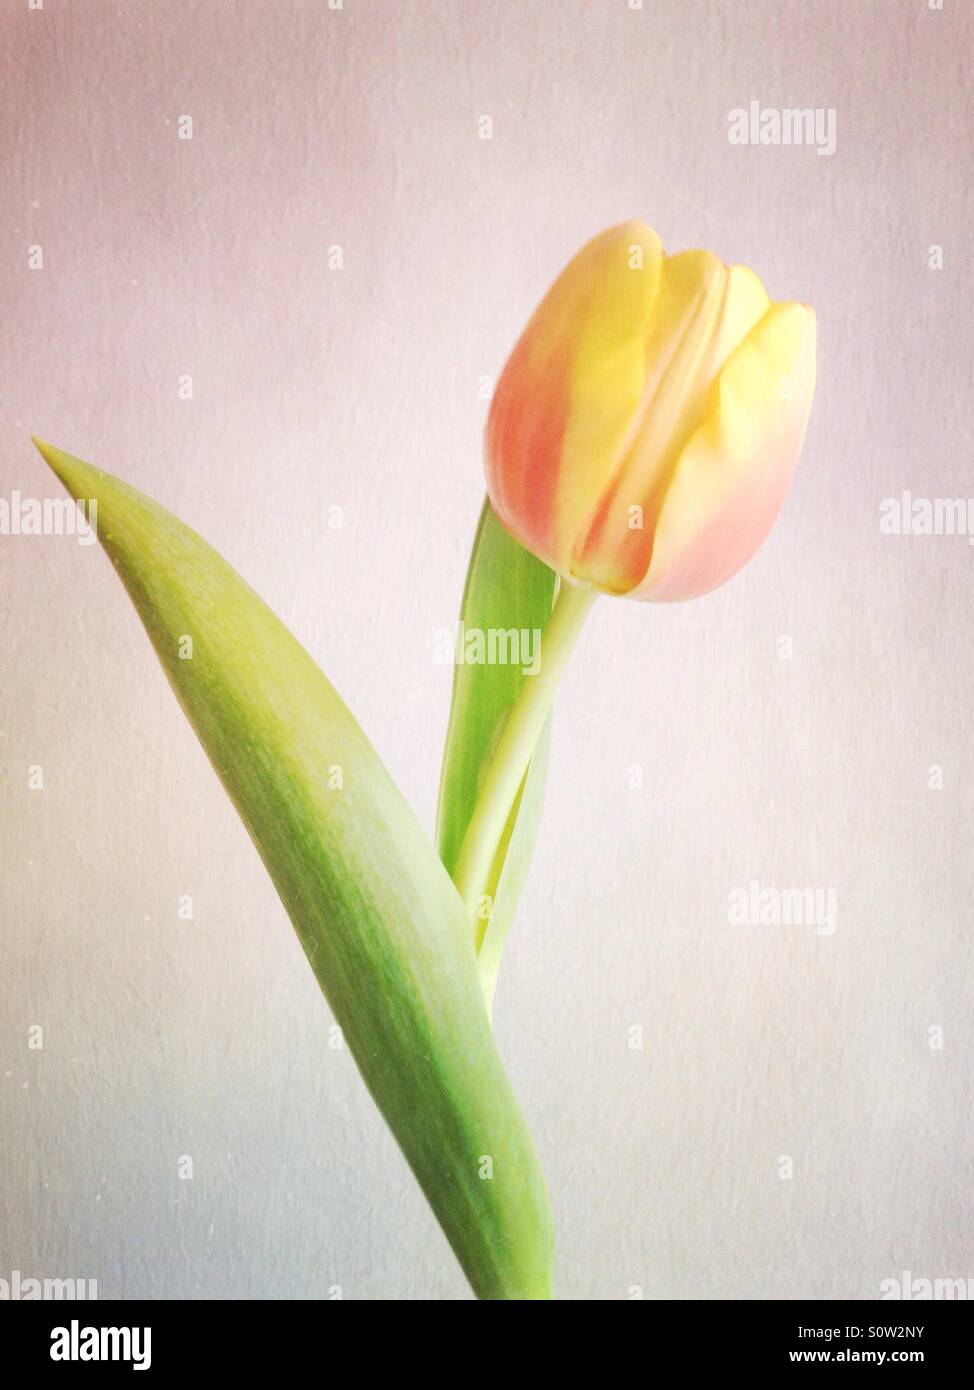 A pastel coloured tulip in front of a white background Stock Photo